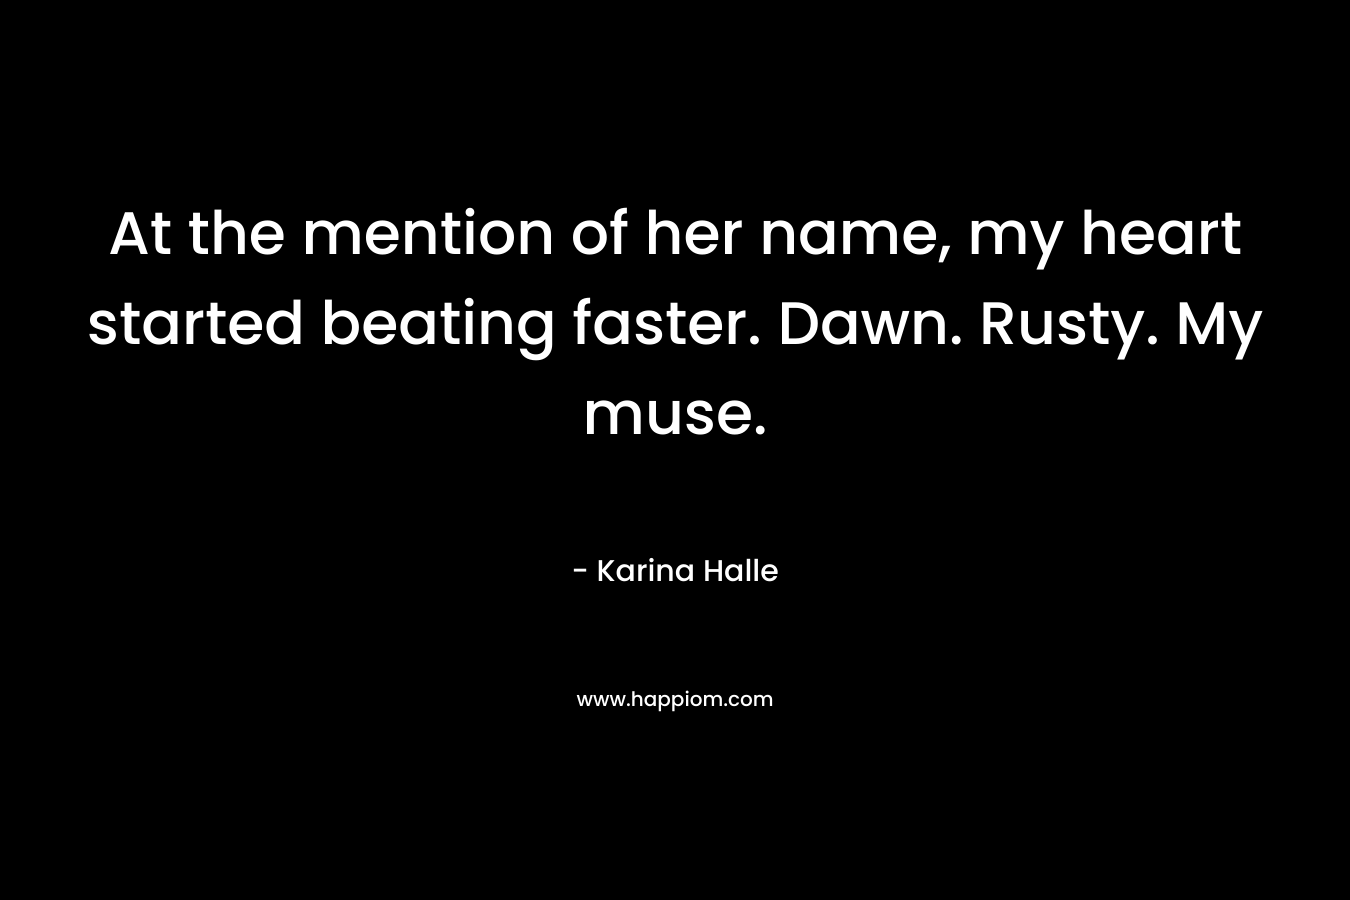 At the mention of her name, my heart started beating faster. Dawn. Rusty. My muse. – Karina Halle